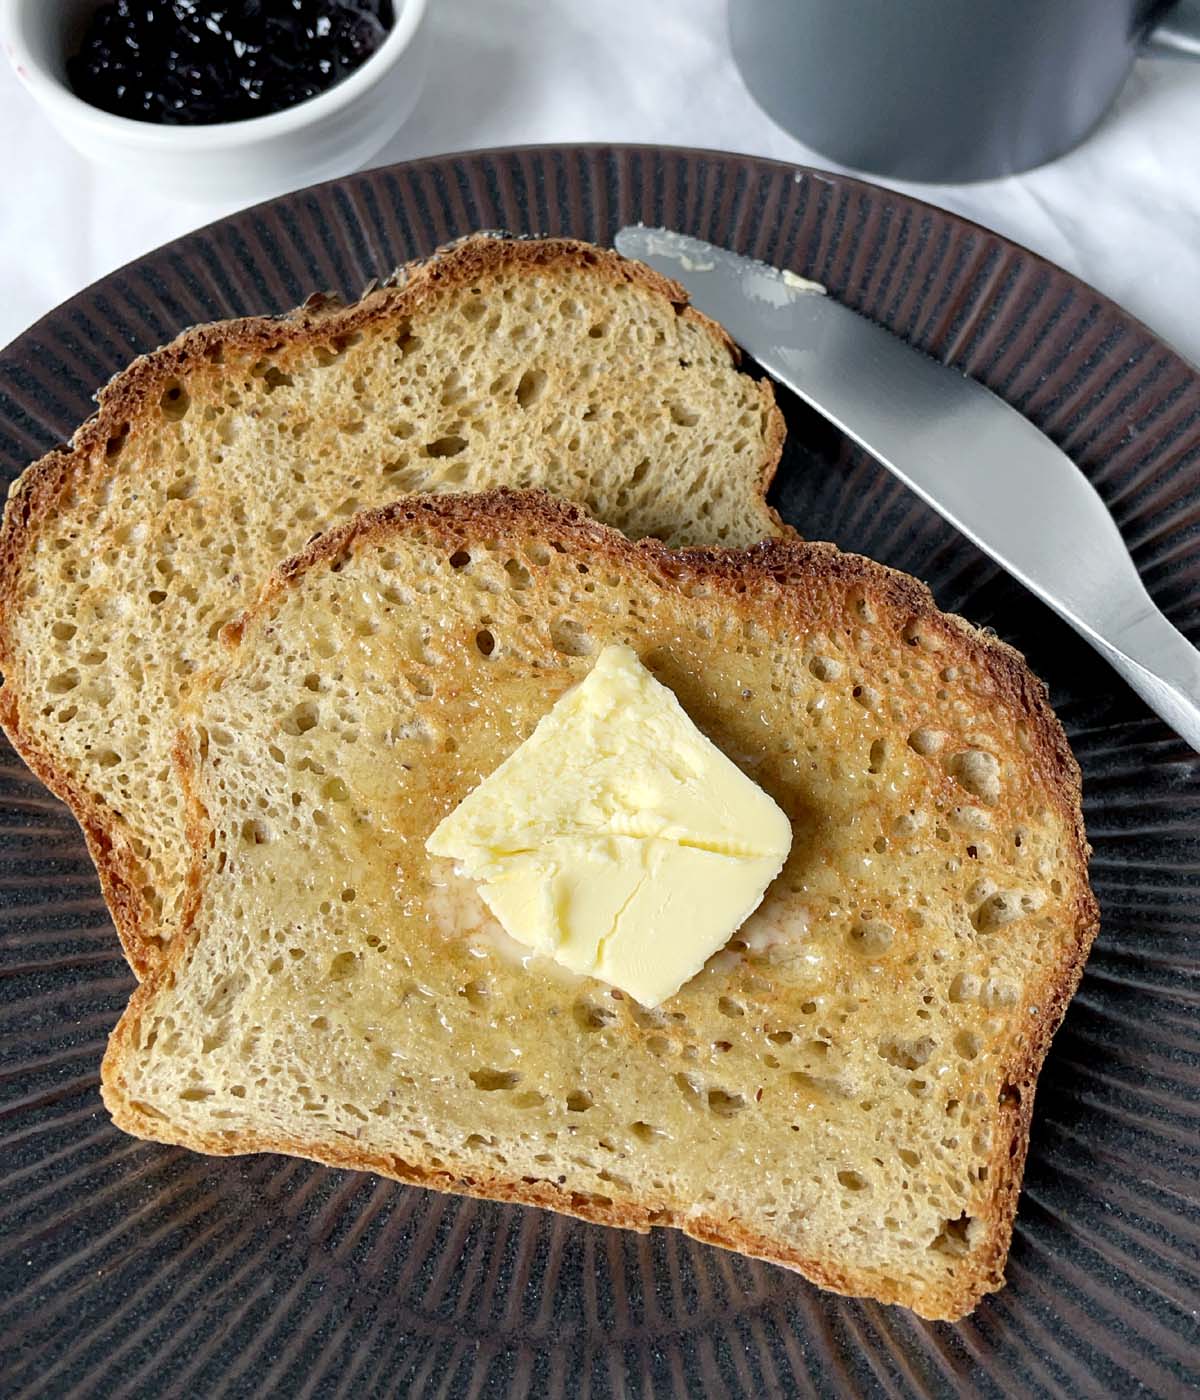 A pat of butter on two slices of toast on a dark brown plate.